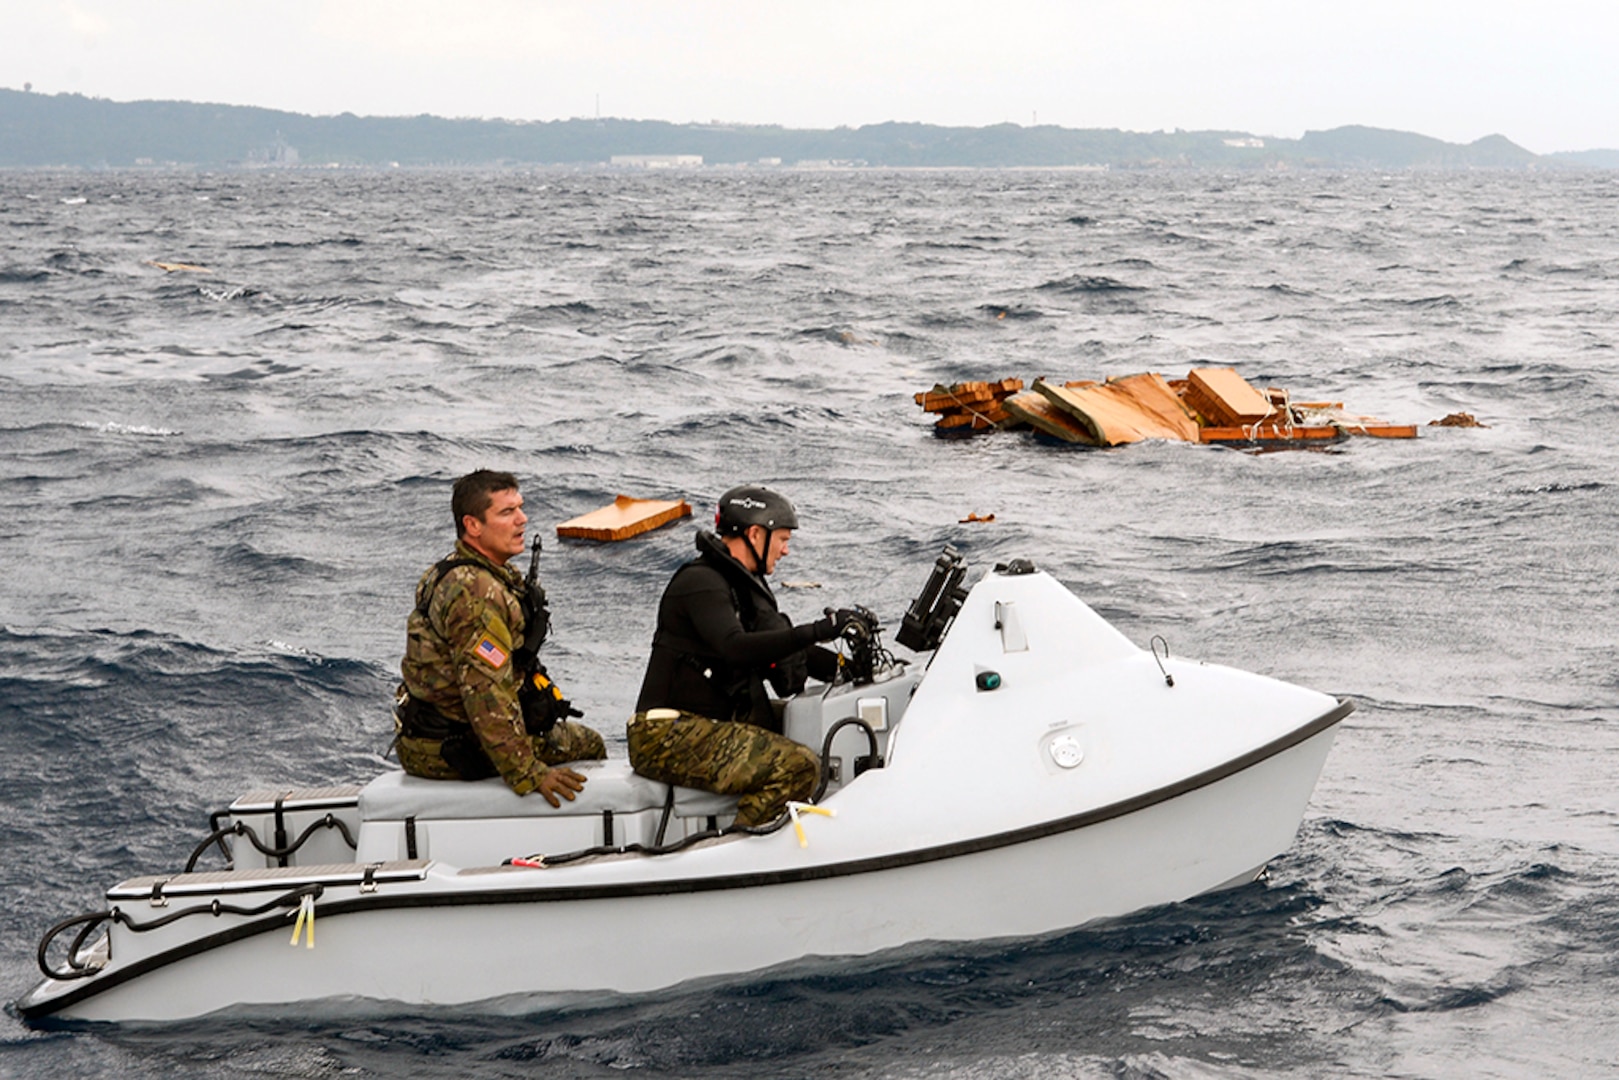 U.S. Air Force Master Sgt. Shane Hargis, Alaska Air National Guard’s 212th Rescue Squadron pararescueman, and Maj. Jay Casello, 212th RQS combat rescue officer, begin a mock search for survivors aboard a Guardian Angel rescue craft Oct. 31, 2015, near the coast of White Beach Naval Base, Japan. The rescue team was airdropped by a C-17 Globemaster from Alaska ANG’s 249th Airlift Squadron in a long range search and rescue exercise. 